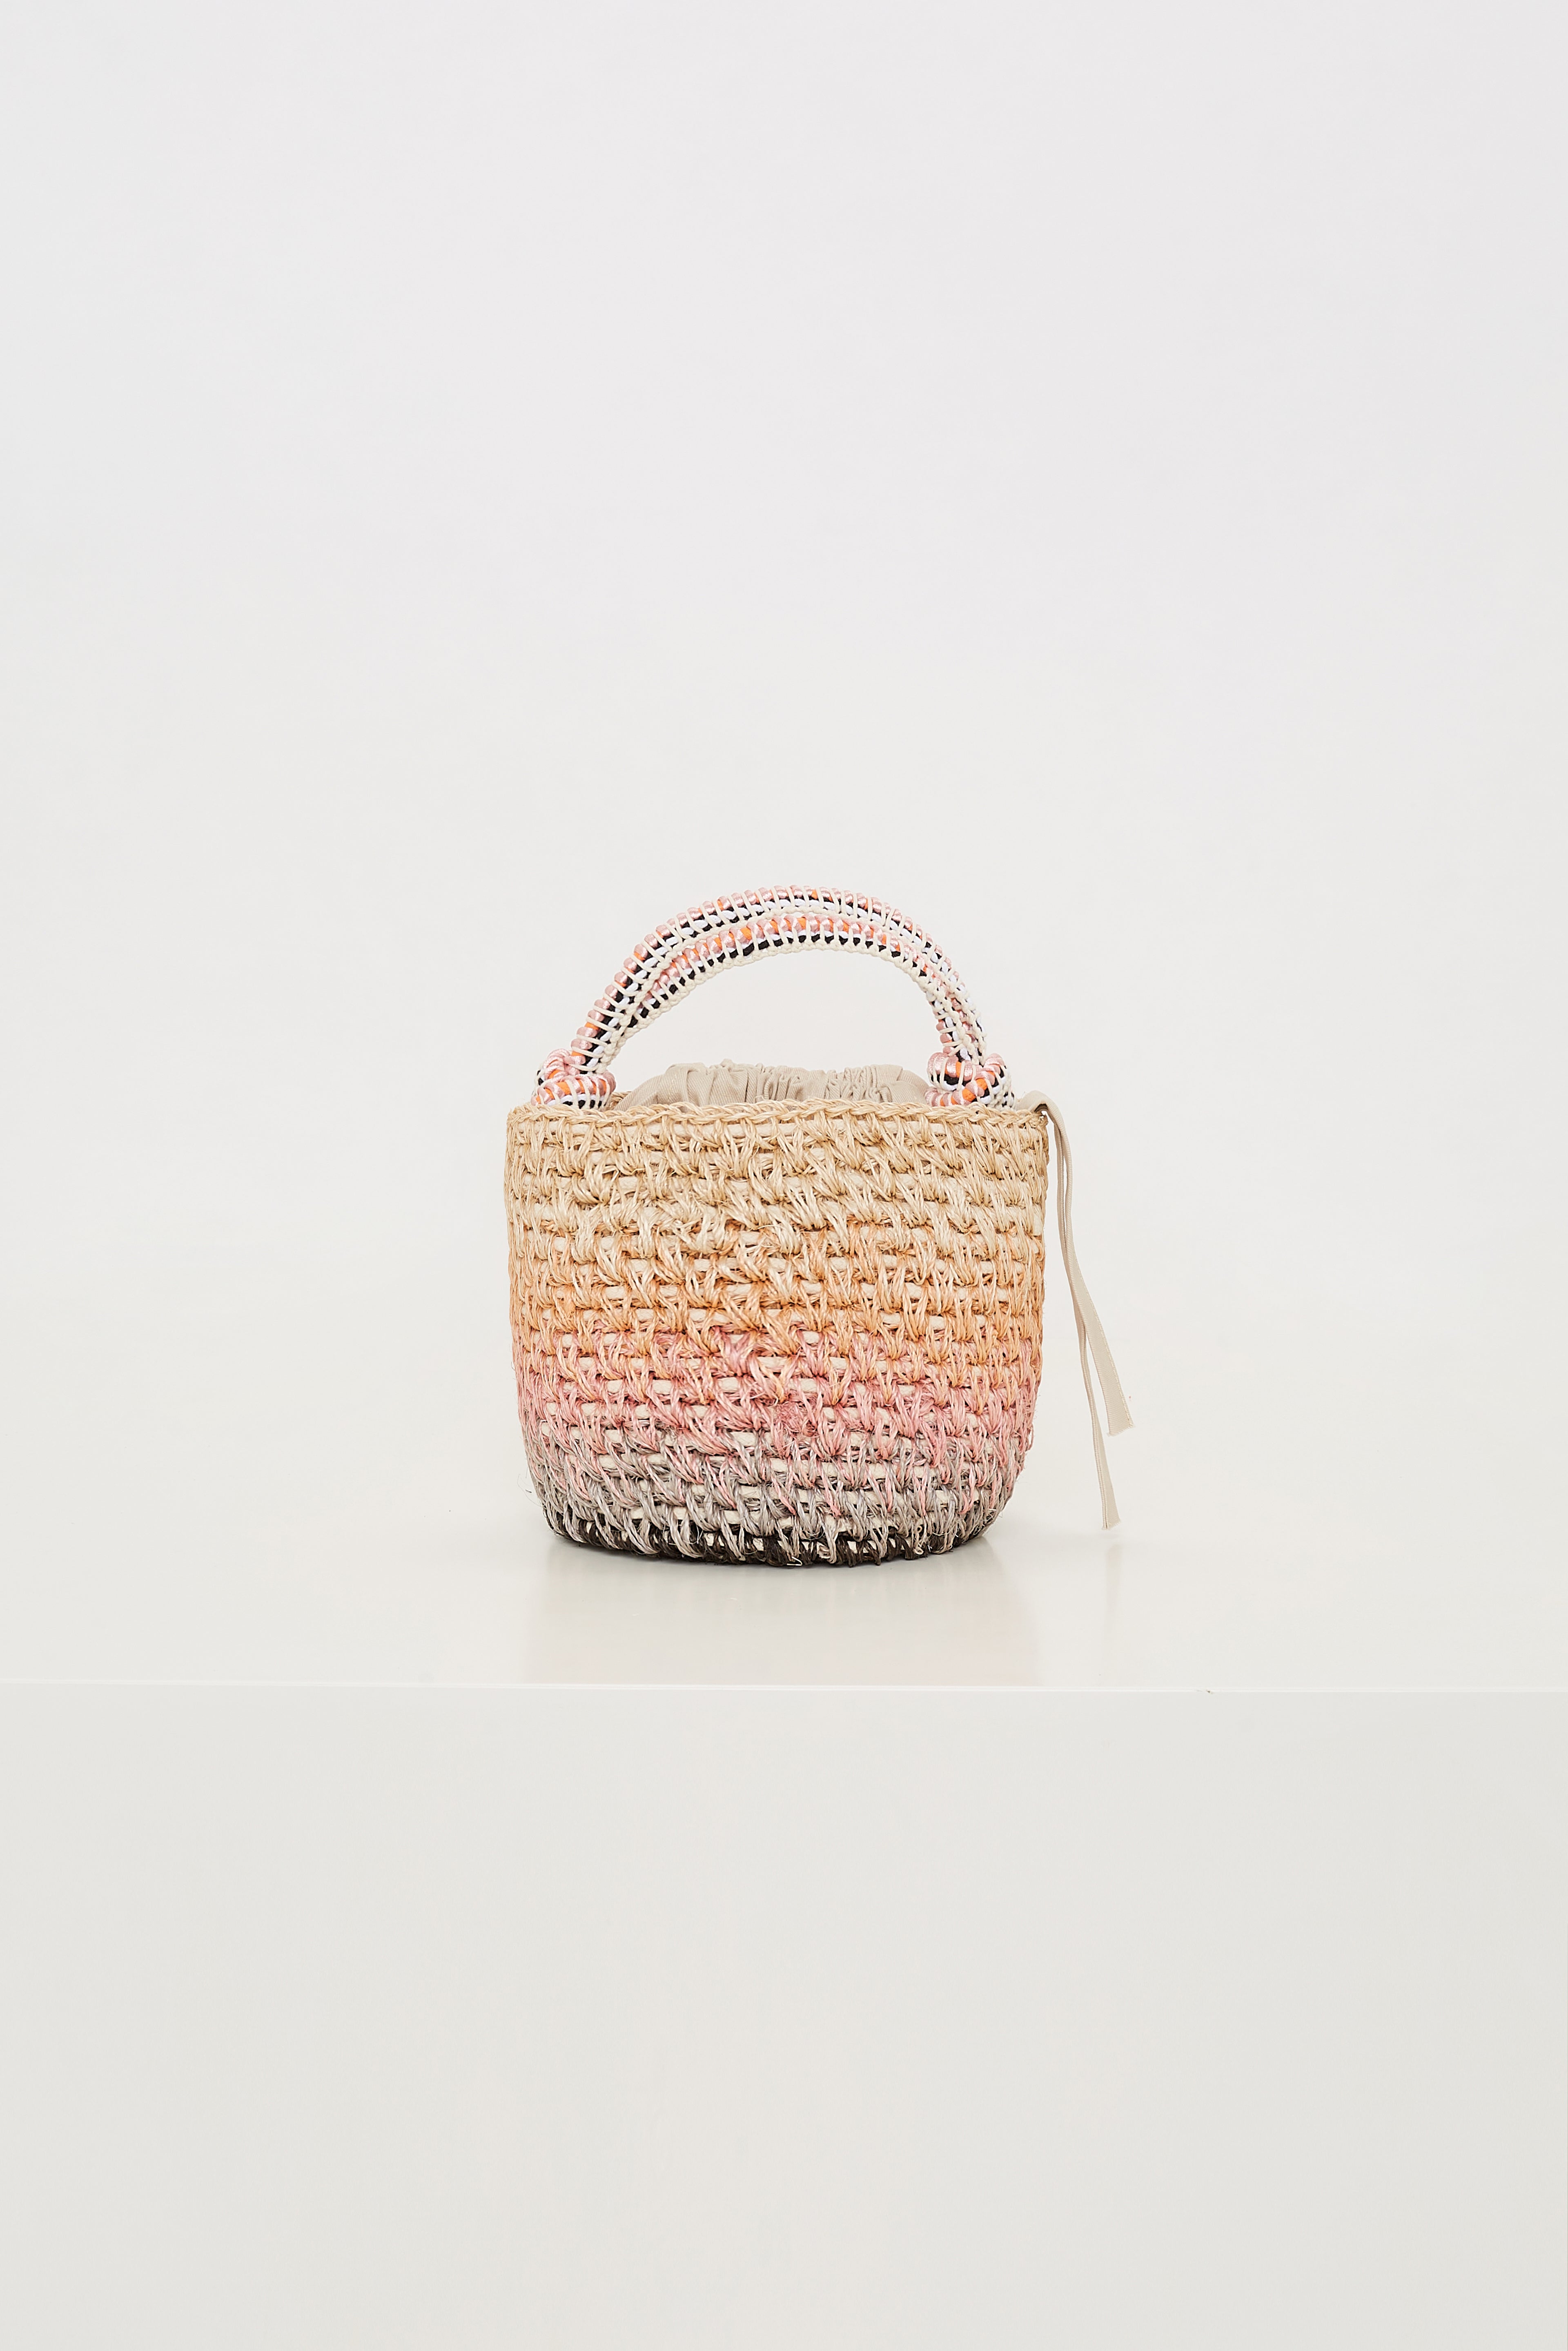 Dorothee-Schumacher-OUTLET-SALE-DEGRADE-DREAMS-mini-straw-bag-Taschen-OS-stripes-mix-ARCHIVE-COLLECTION.jpg